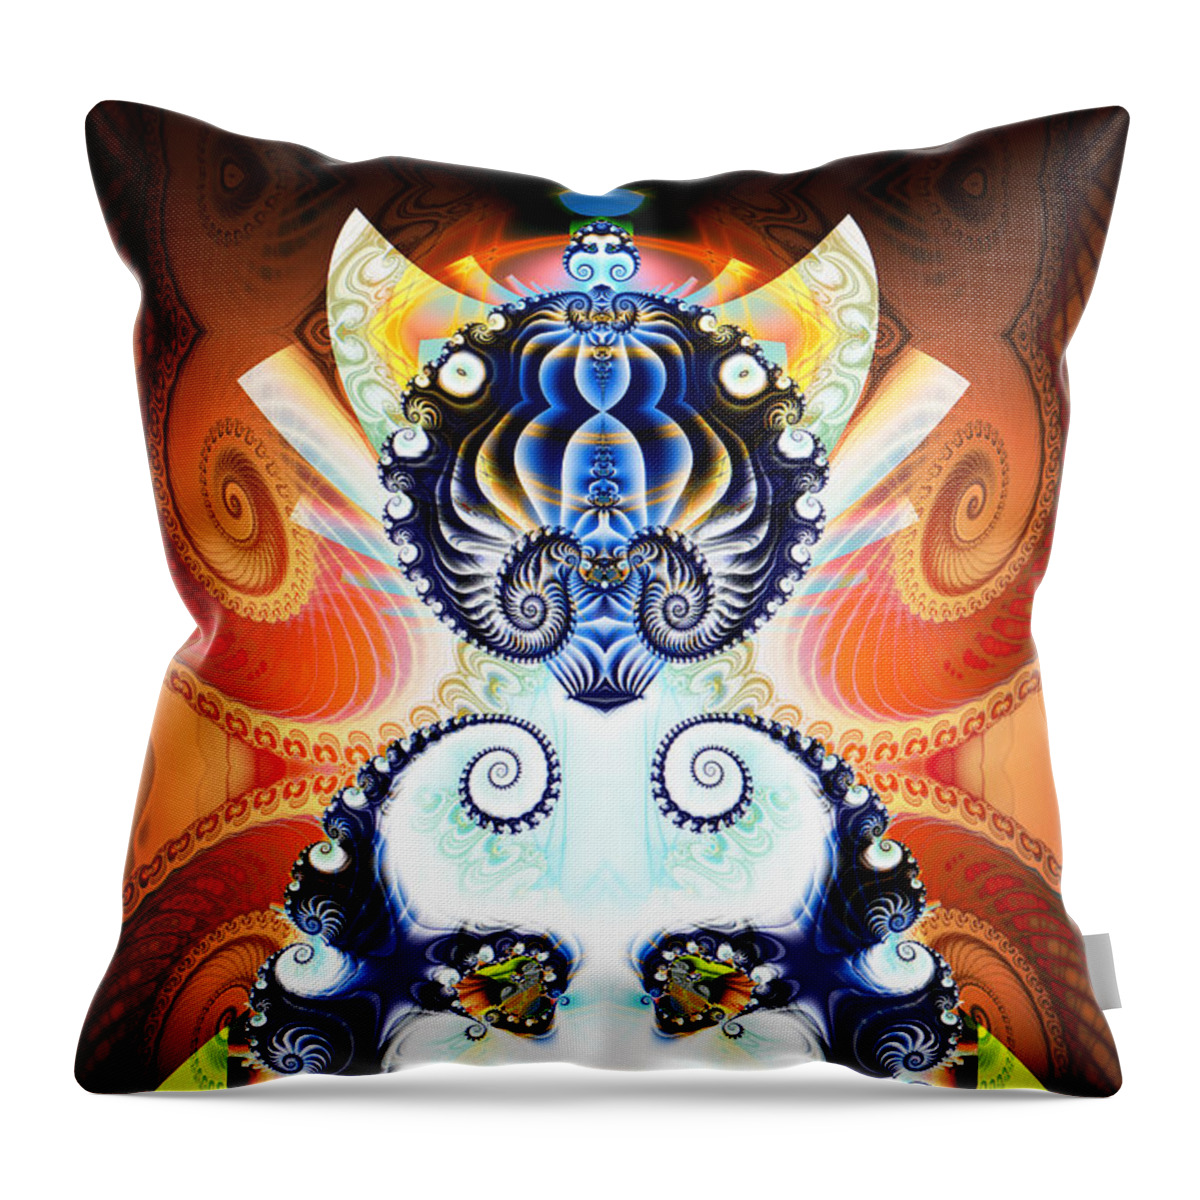 Jim Pavelle Throw Pillow featuring the digital art Li Shou - Ancient Chinese Cat Goddess by Jim Pavelle